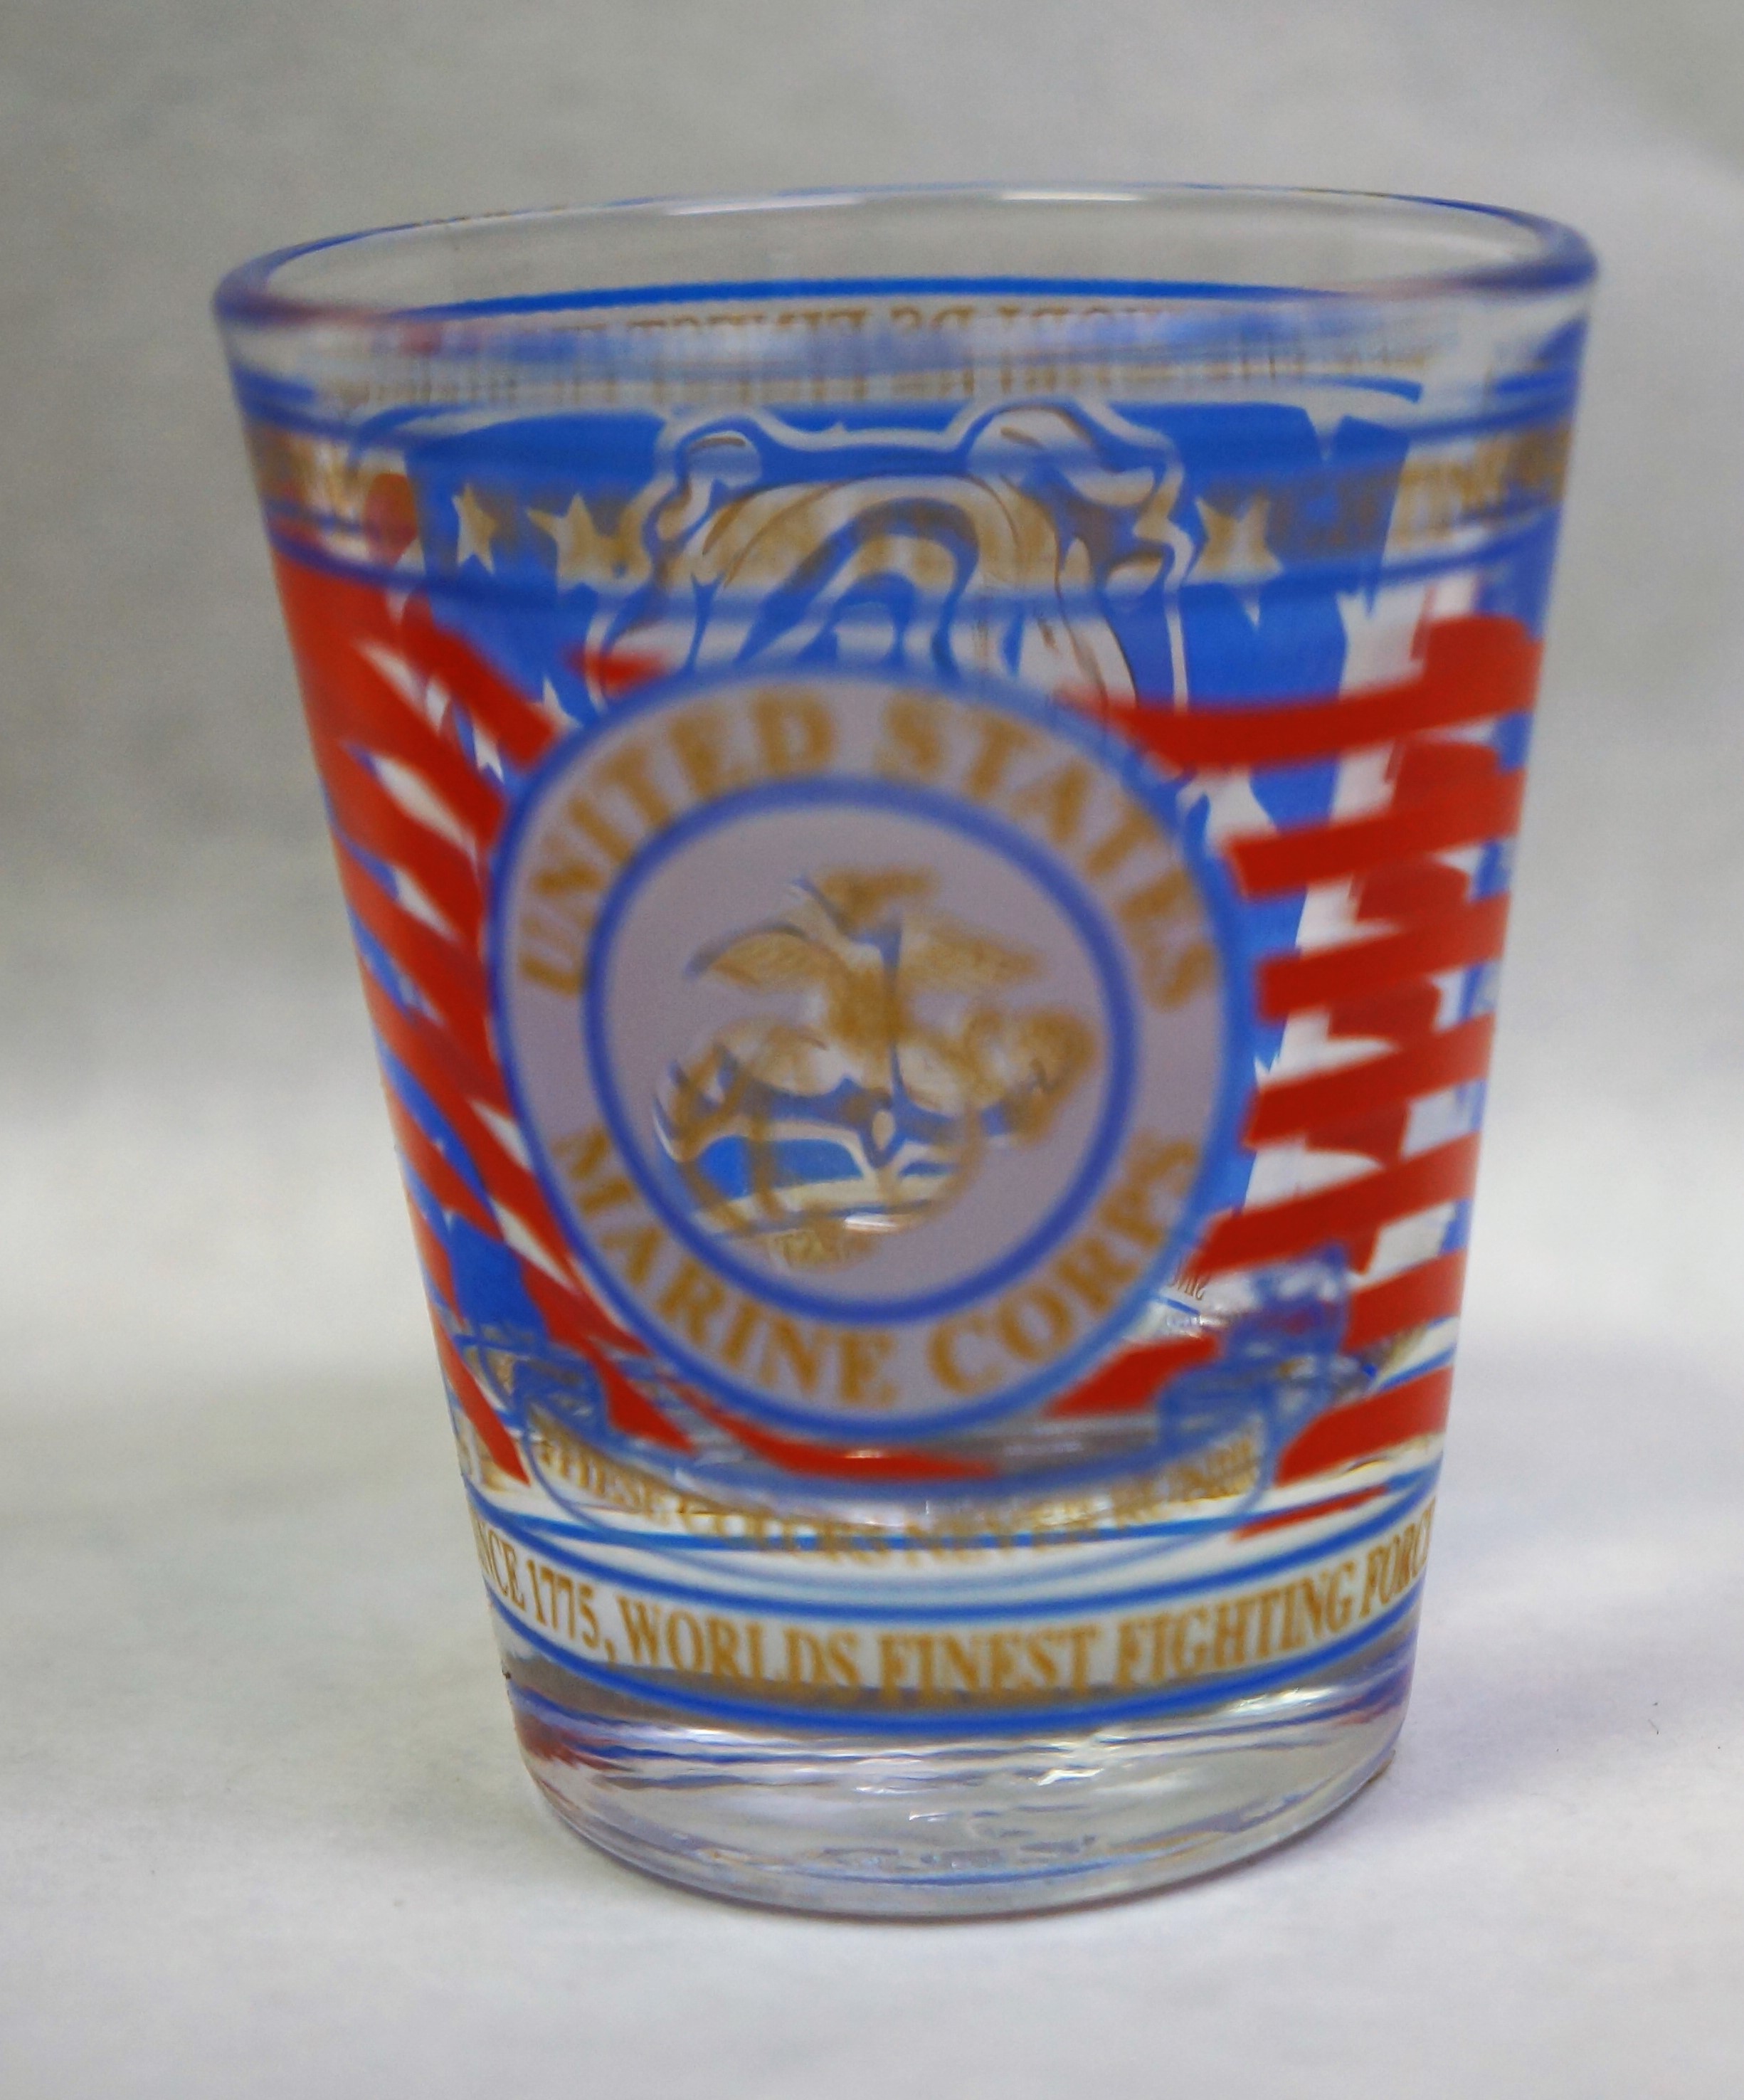 SHOT GLASS-Worlds Finest Fighting Force 2oz or 2.5oz